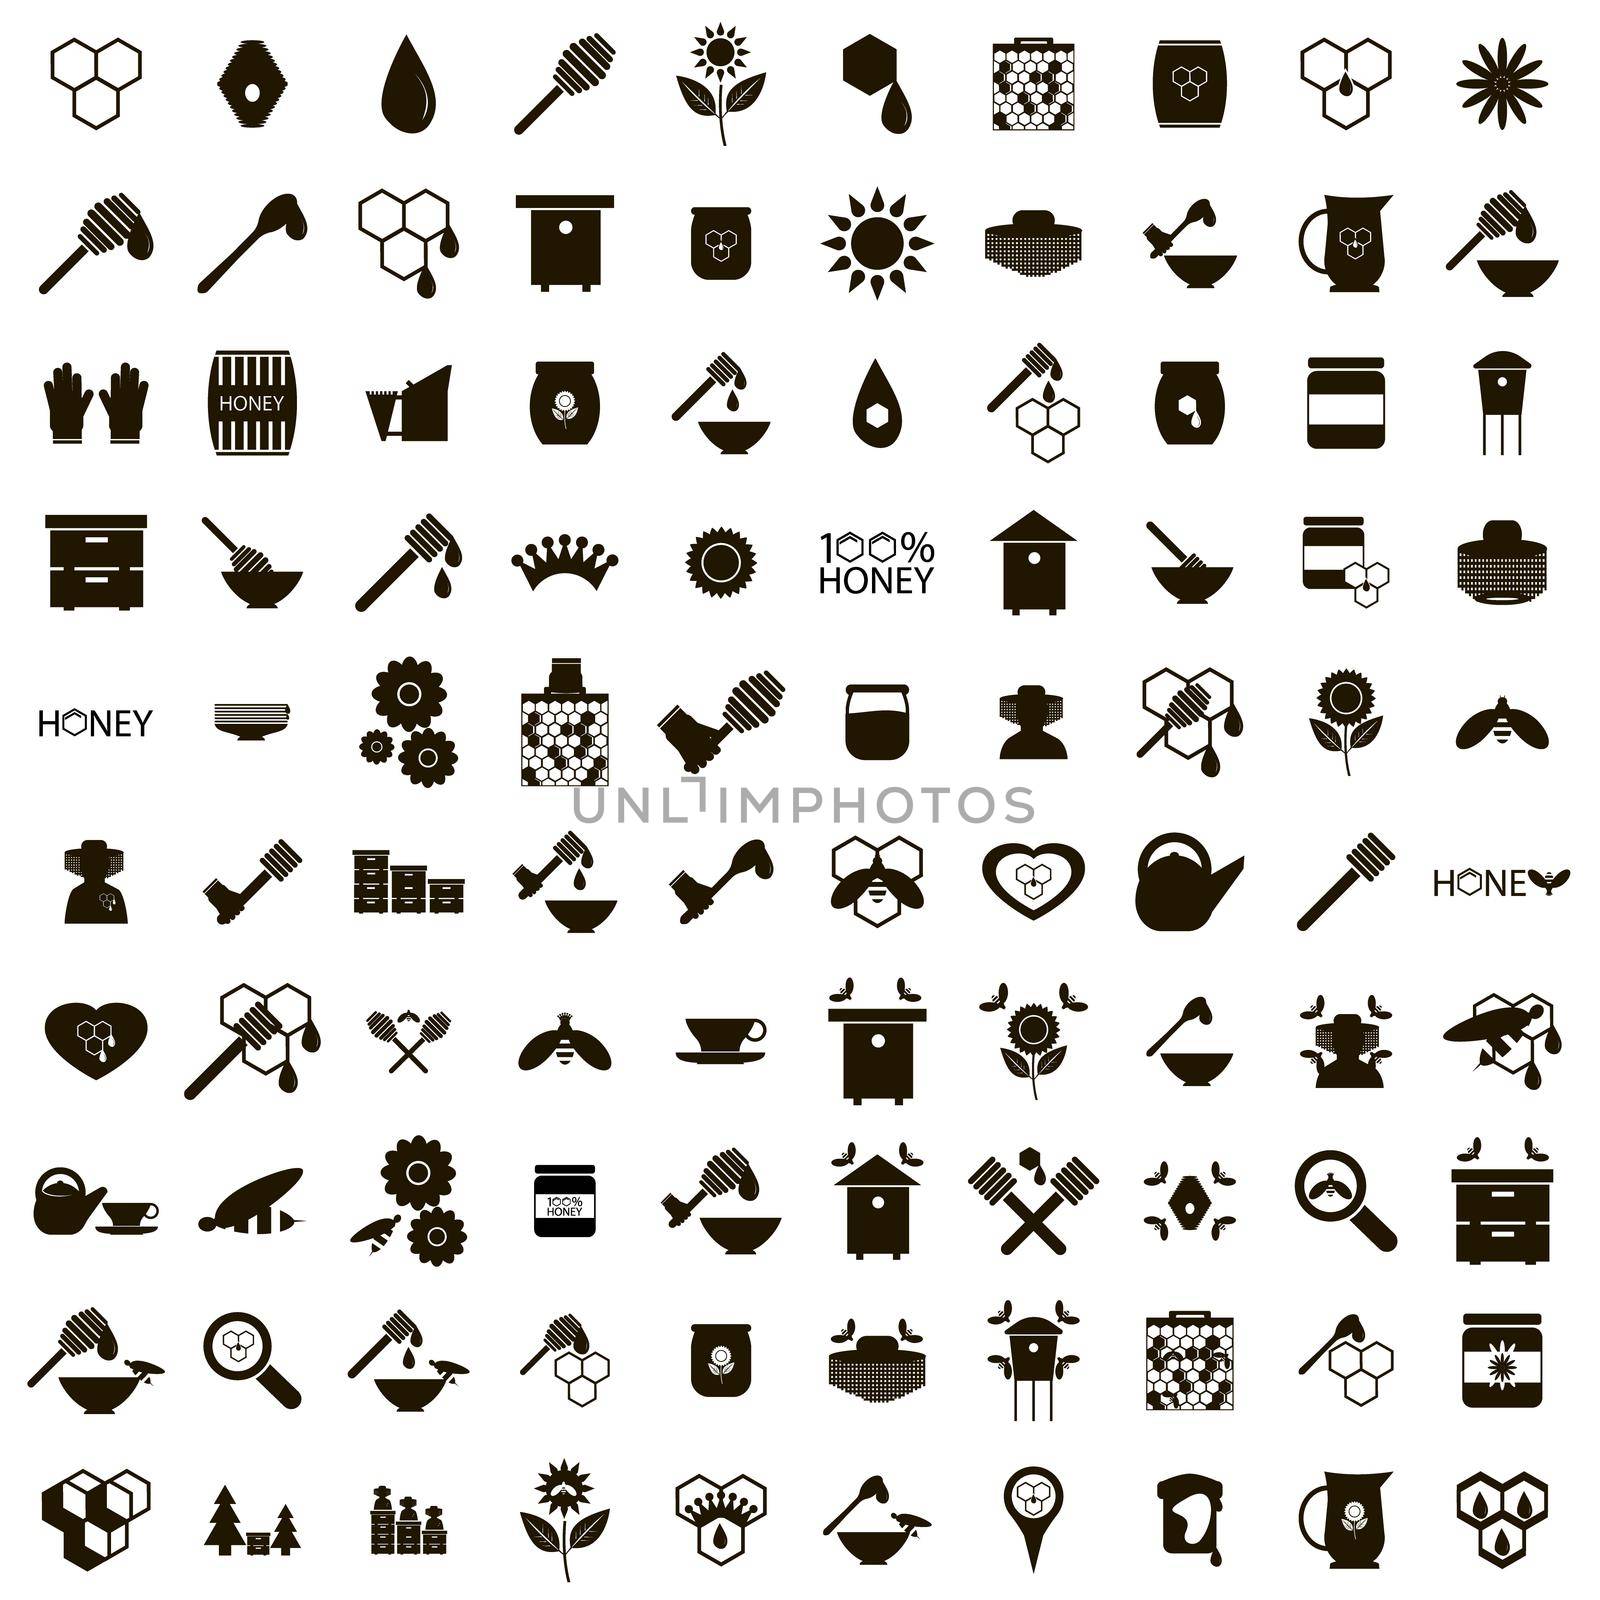 100 Apiary icons set in simple style isolated on white background